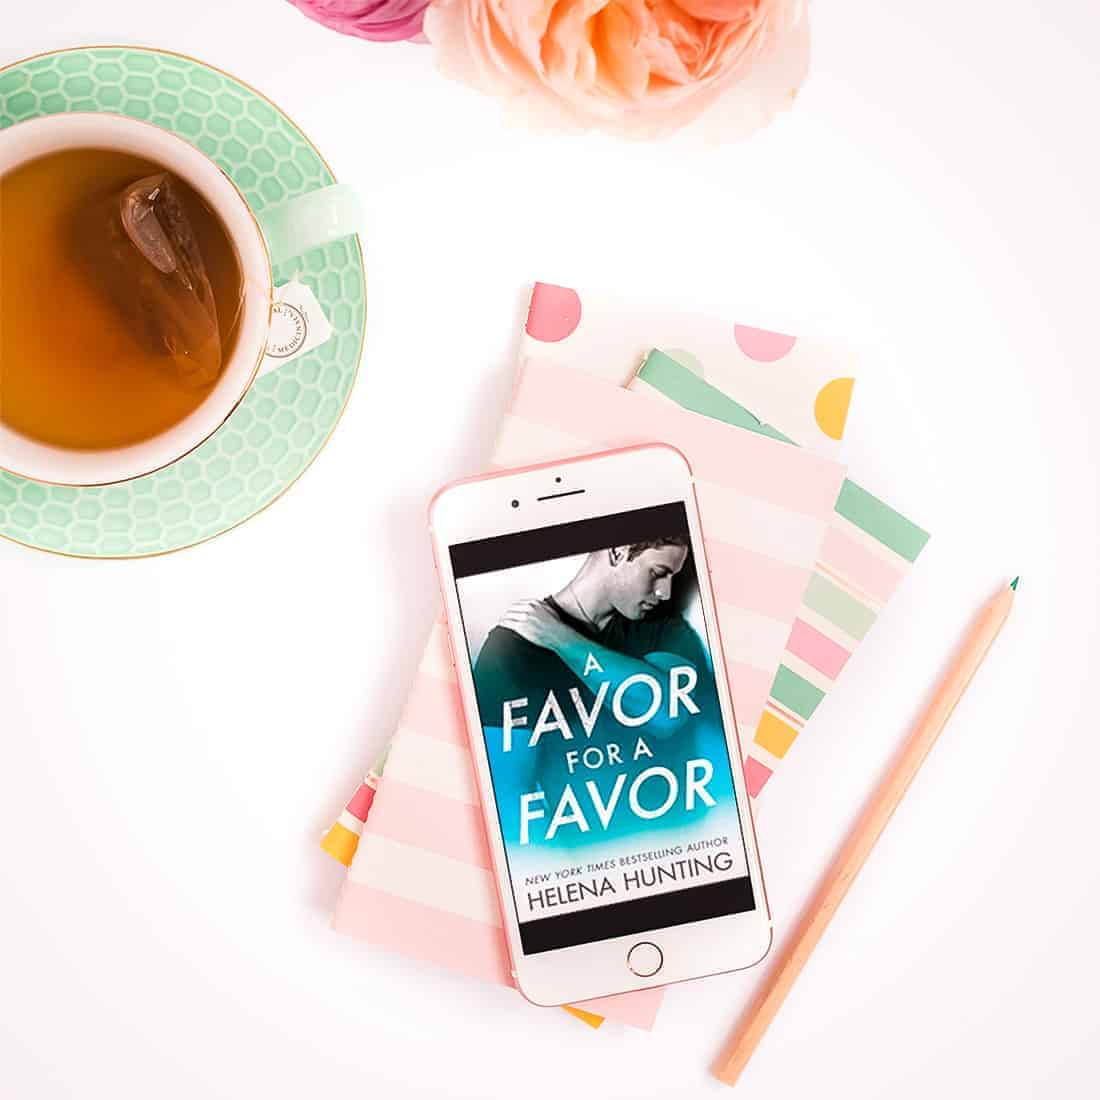 A Favor for a Favor by Helena Hunting – All In Book 2